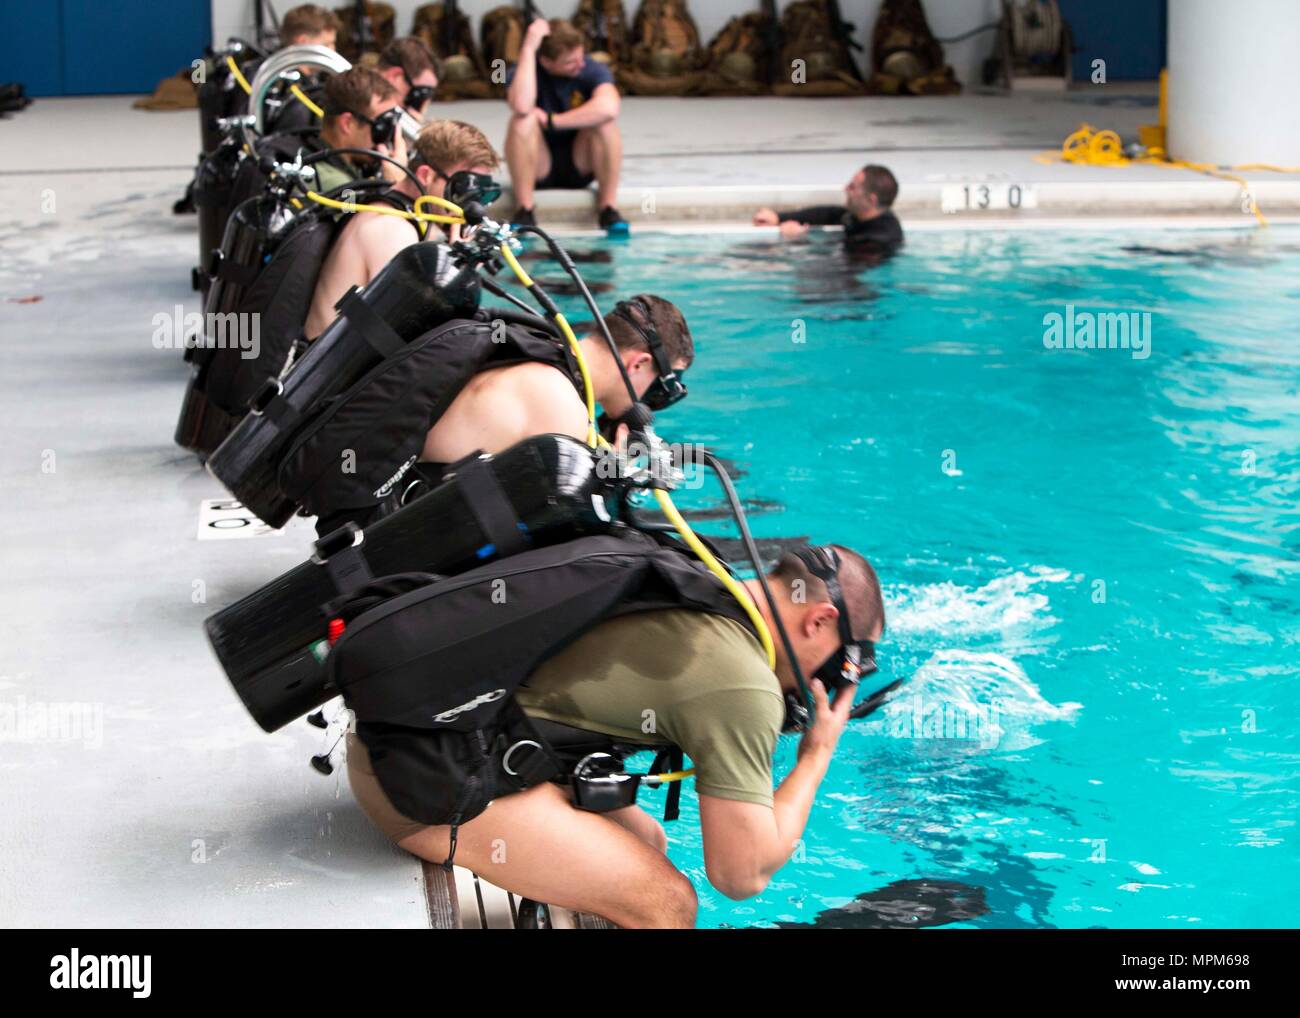 Marines dive into the pool during a battalion training event at Camp Lejeune, N.C., March 23, 2017. The self-contained underwater breathing apparatus provides Marines with deep-water diving capabilities essential for conducting real-world scenarios. The Marines are with 2nd Reconnaissance Battalion, 2nd Marine Division. (U.S. Marine Corps photo by Sgt. Clemente C. Garcia) Stock Photo